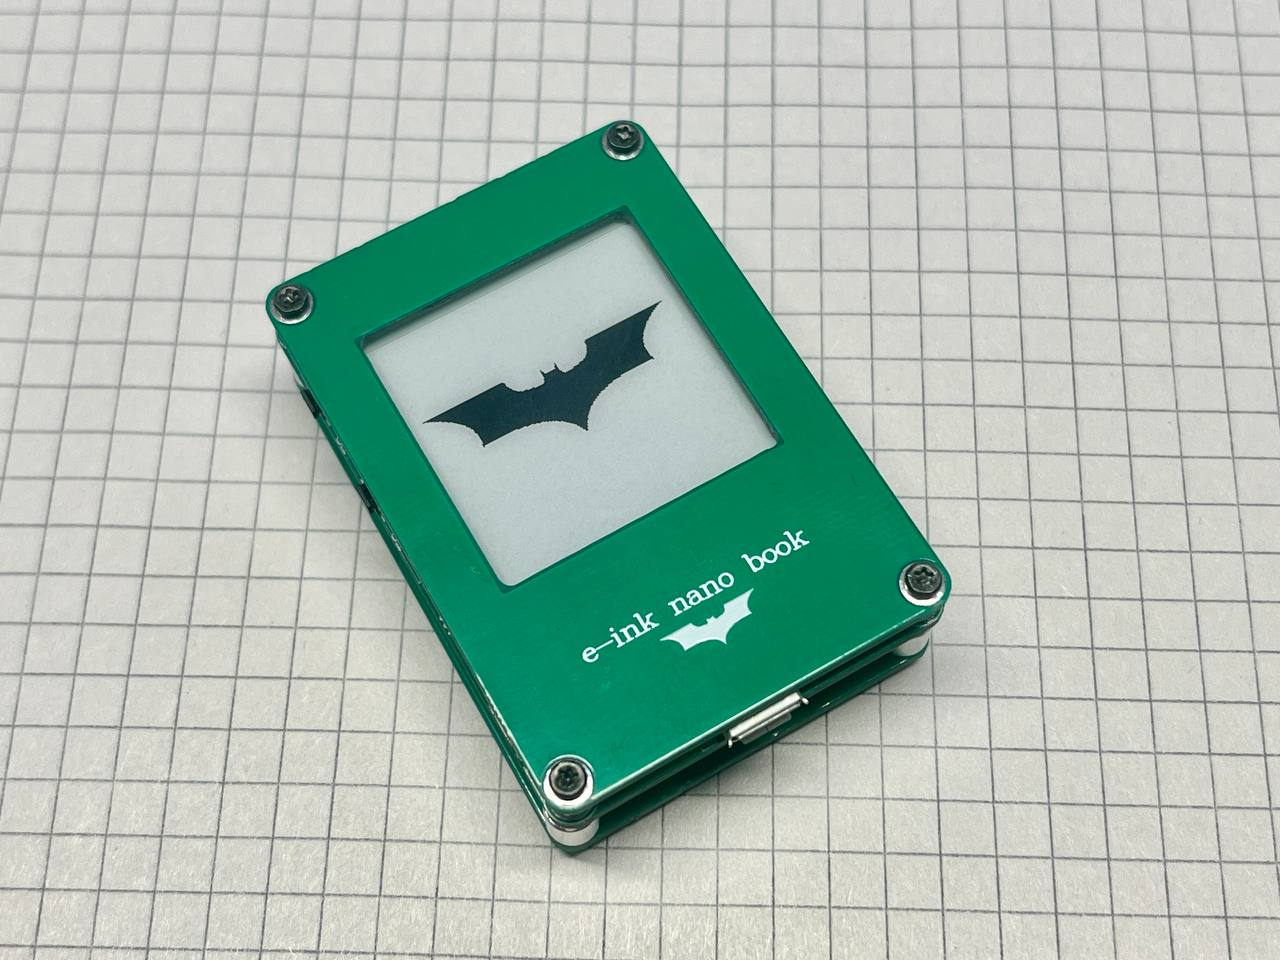 Development of the world's smallest book on an e-ink display - My, Timeweb, With your own hands, Electronics, e-Ink, Assembly, Гаджеты, Witcher, Technics, Display, Homemade, Video, Youtube, Longpost